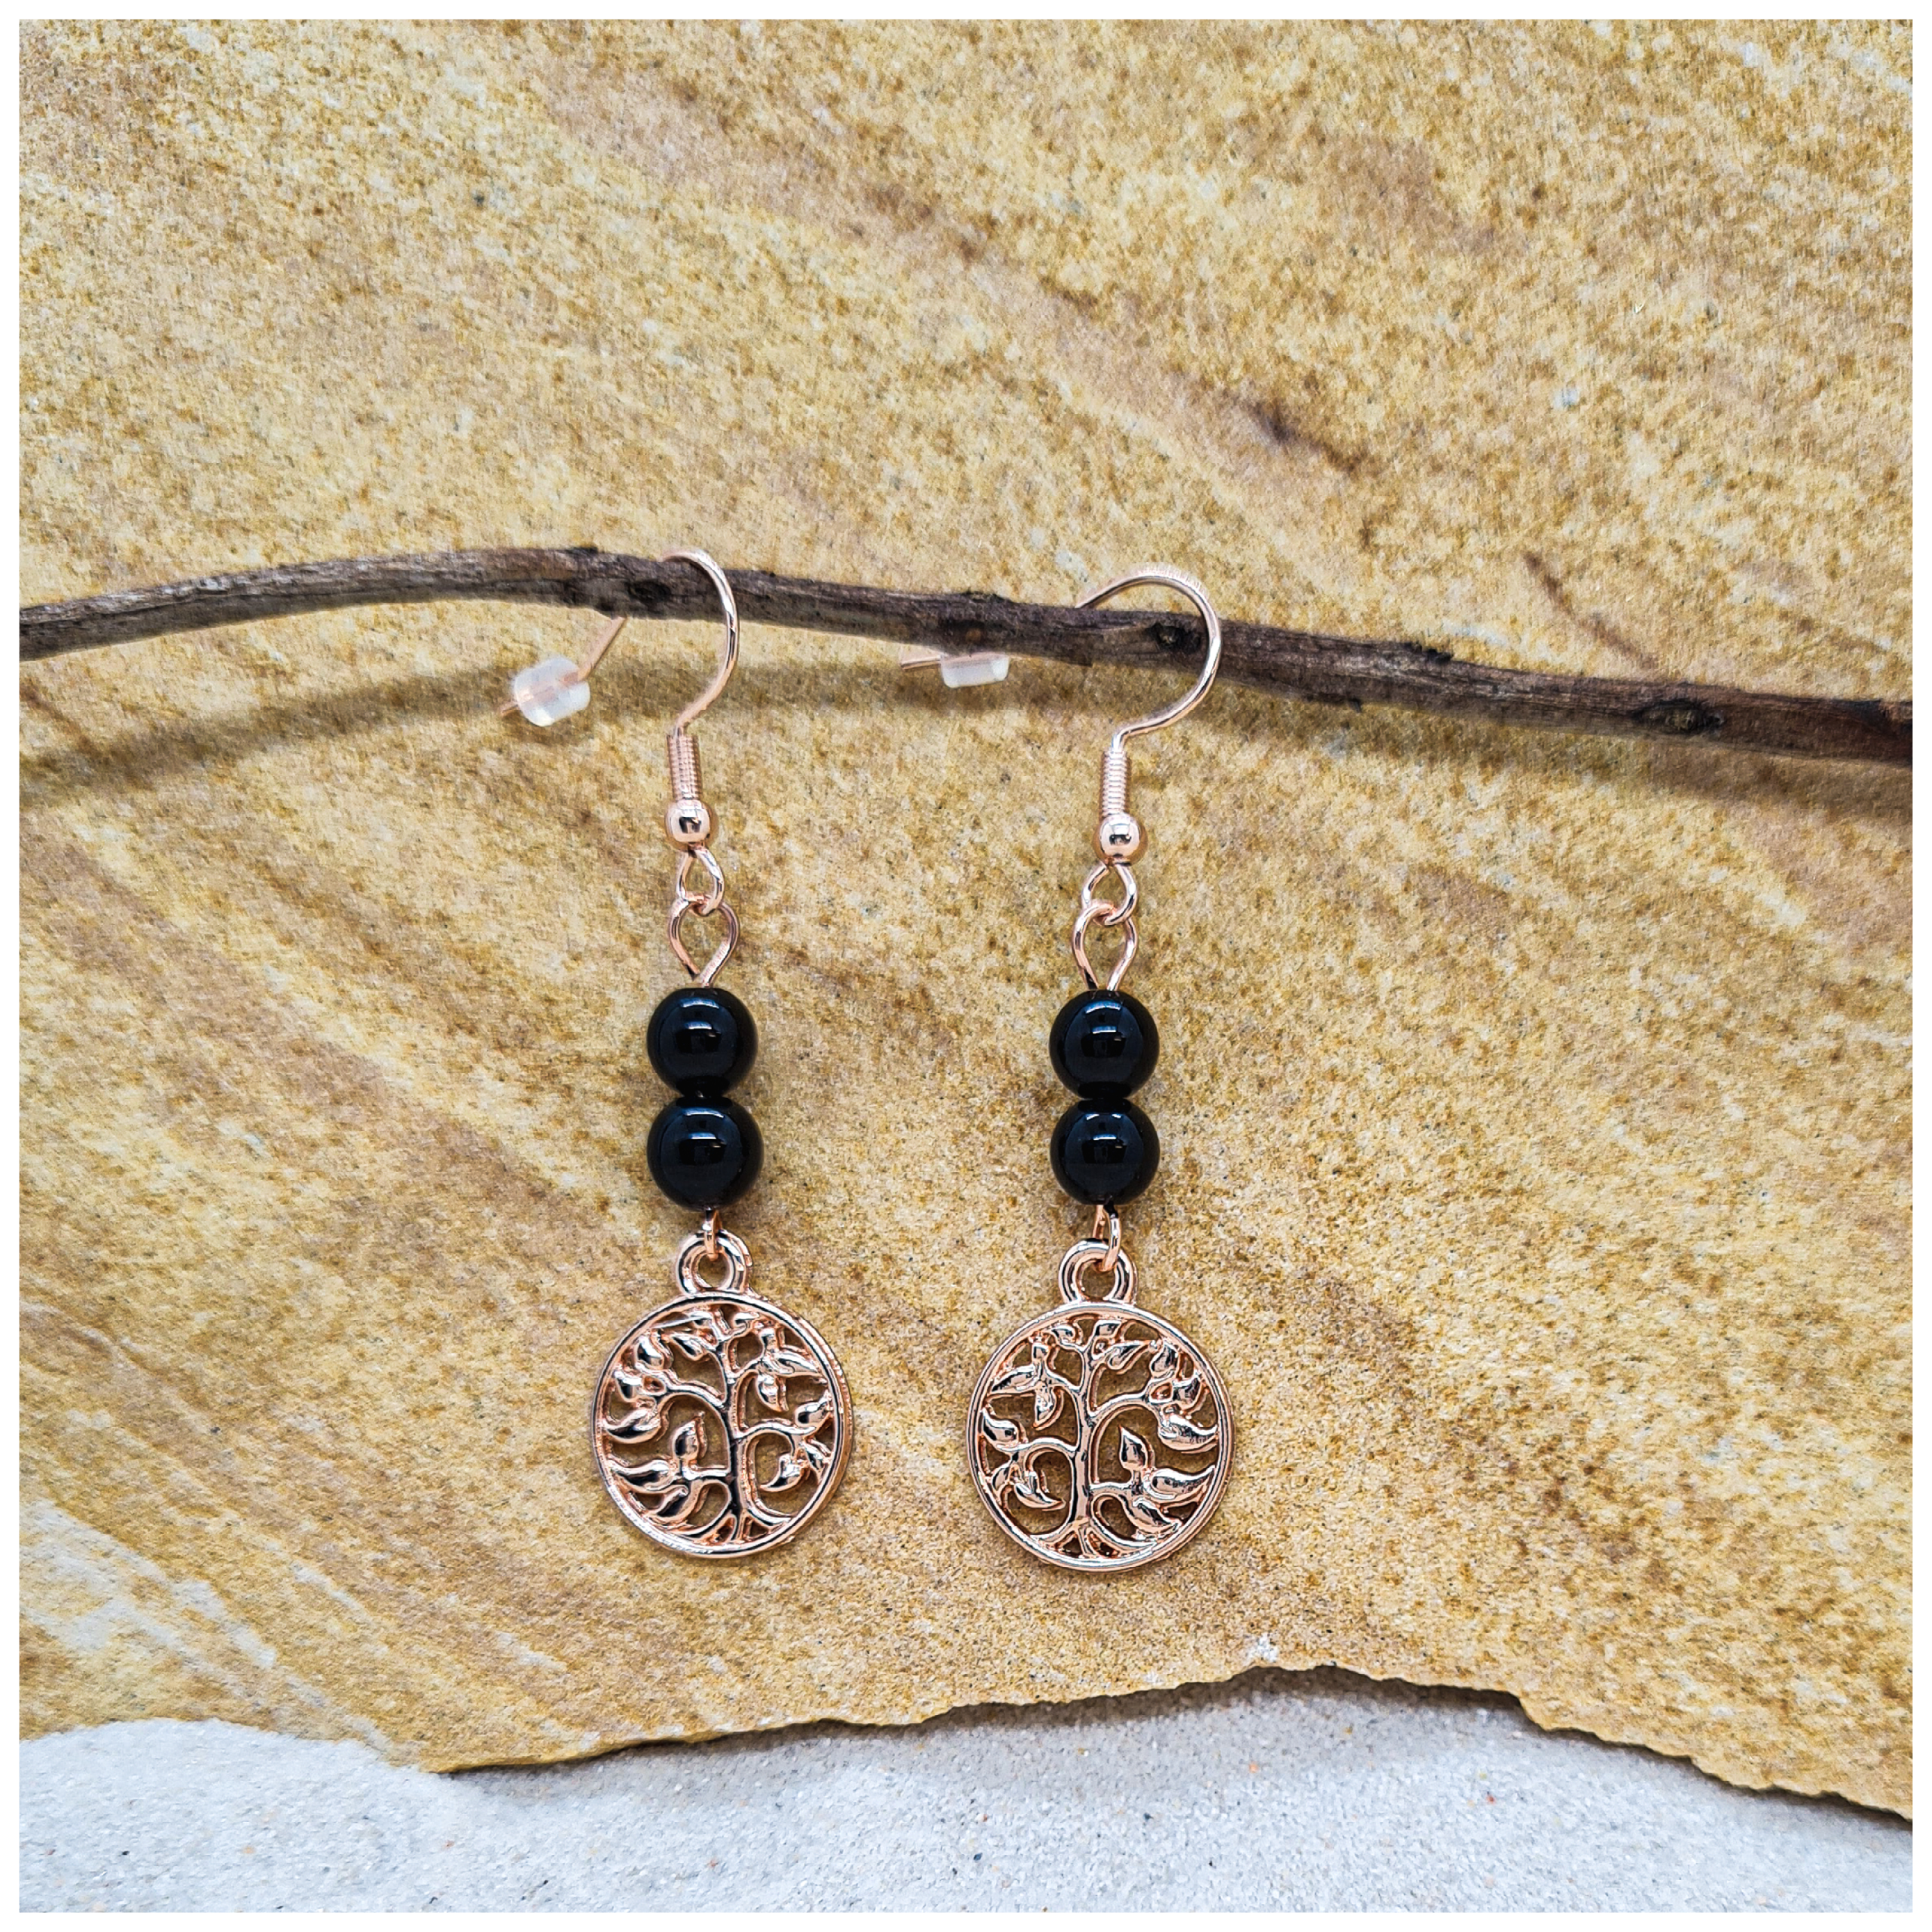 Black Obsidian 6mm crystal bead drop earrings with rose gold tree of life charm